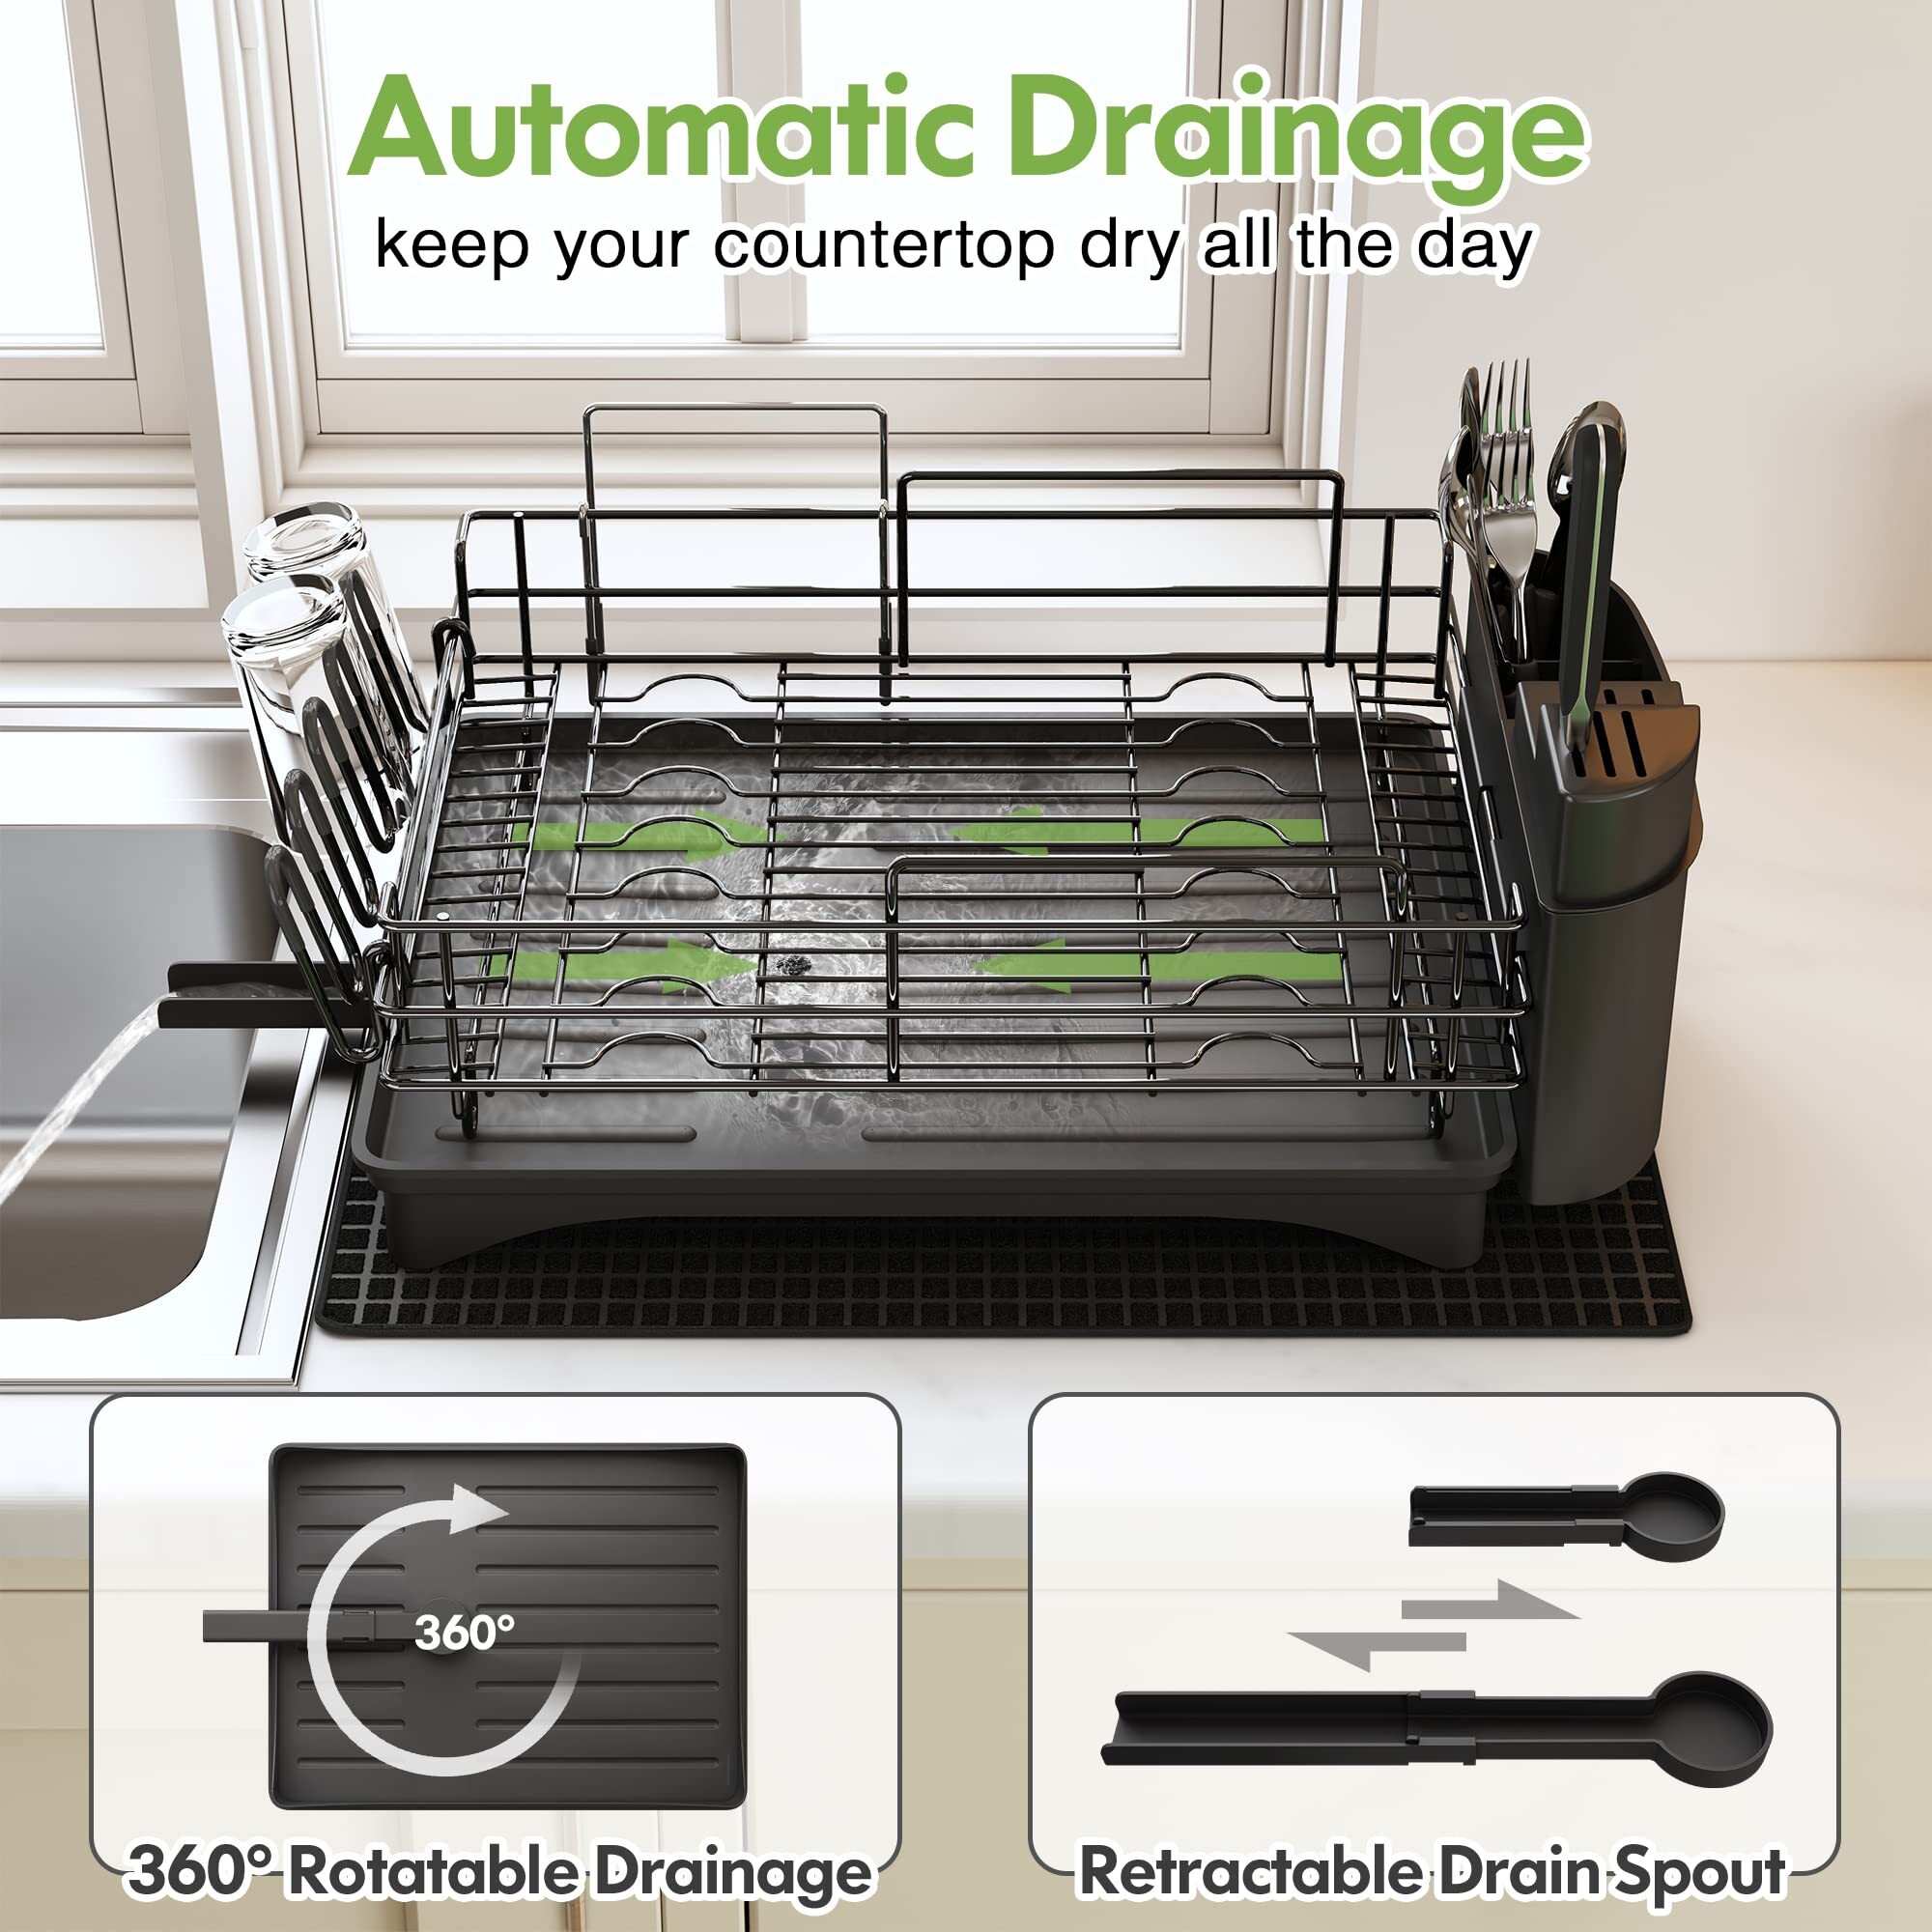 Dish Drying Racks for Kitchen Counter, Stainless Steel 2 Tier Black Dish Dryer Rack with Drainboard Set, Large Dish Drainers with Wine Glass Holder, Utensil Holder and Dryer Mat